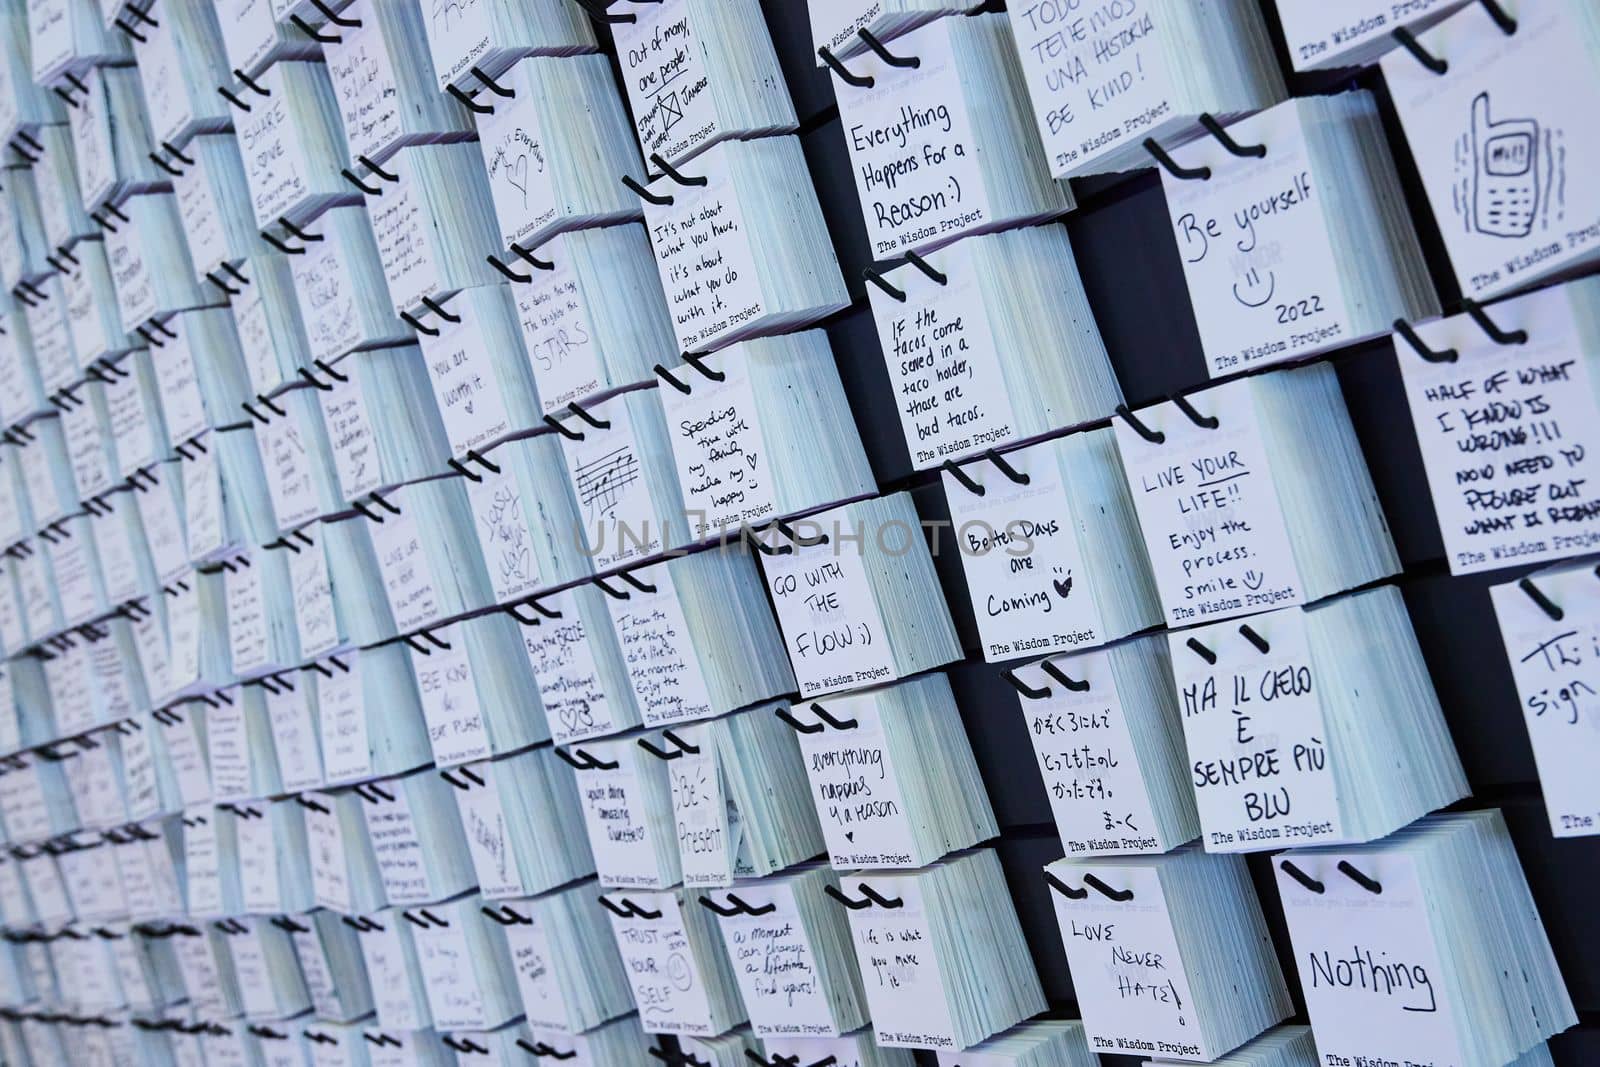 Image of Wall covered in handwritten notes for facts about life from random people